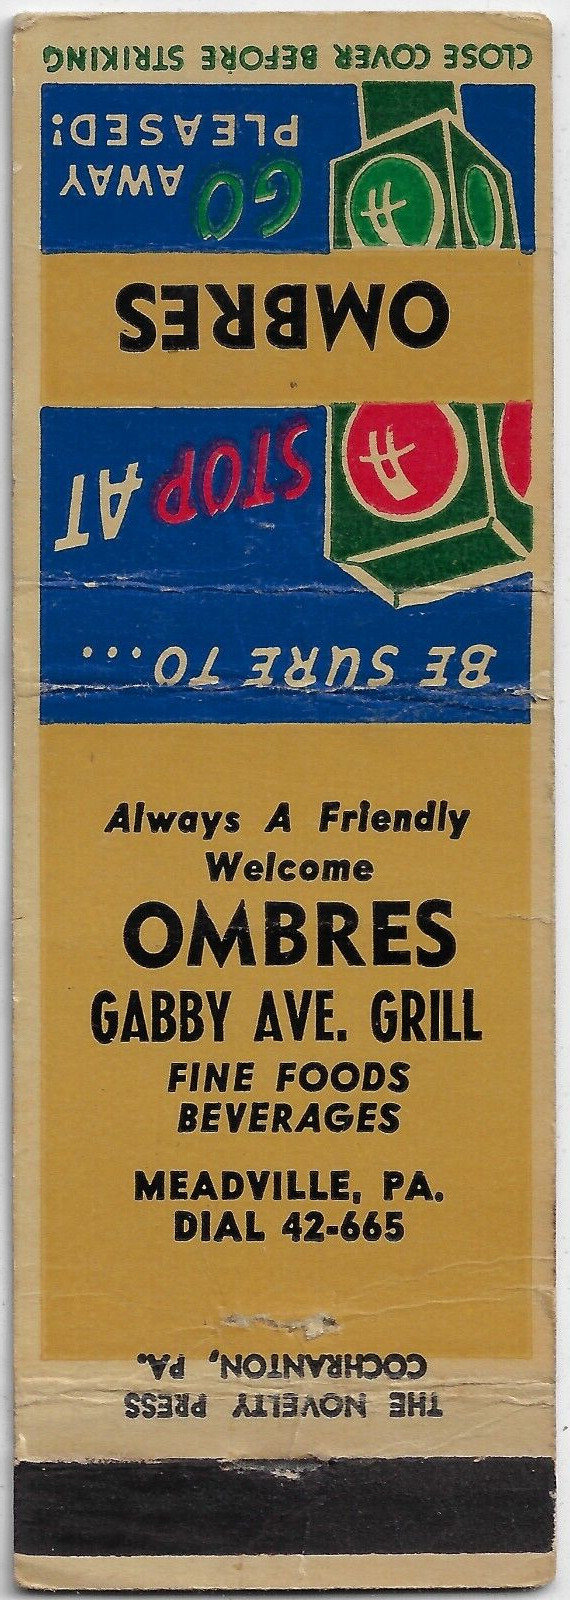 FS Empty Matchbook Cover Ombres Gabby Ave Grill Meadville PA.